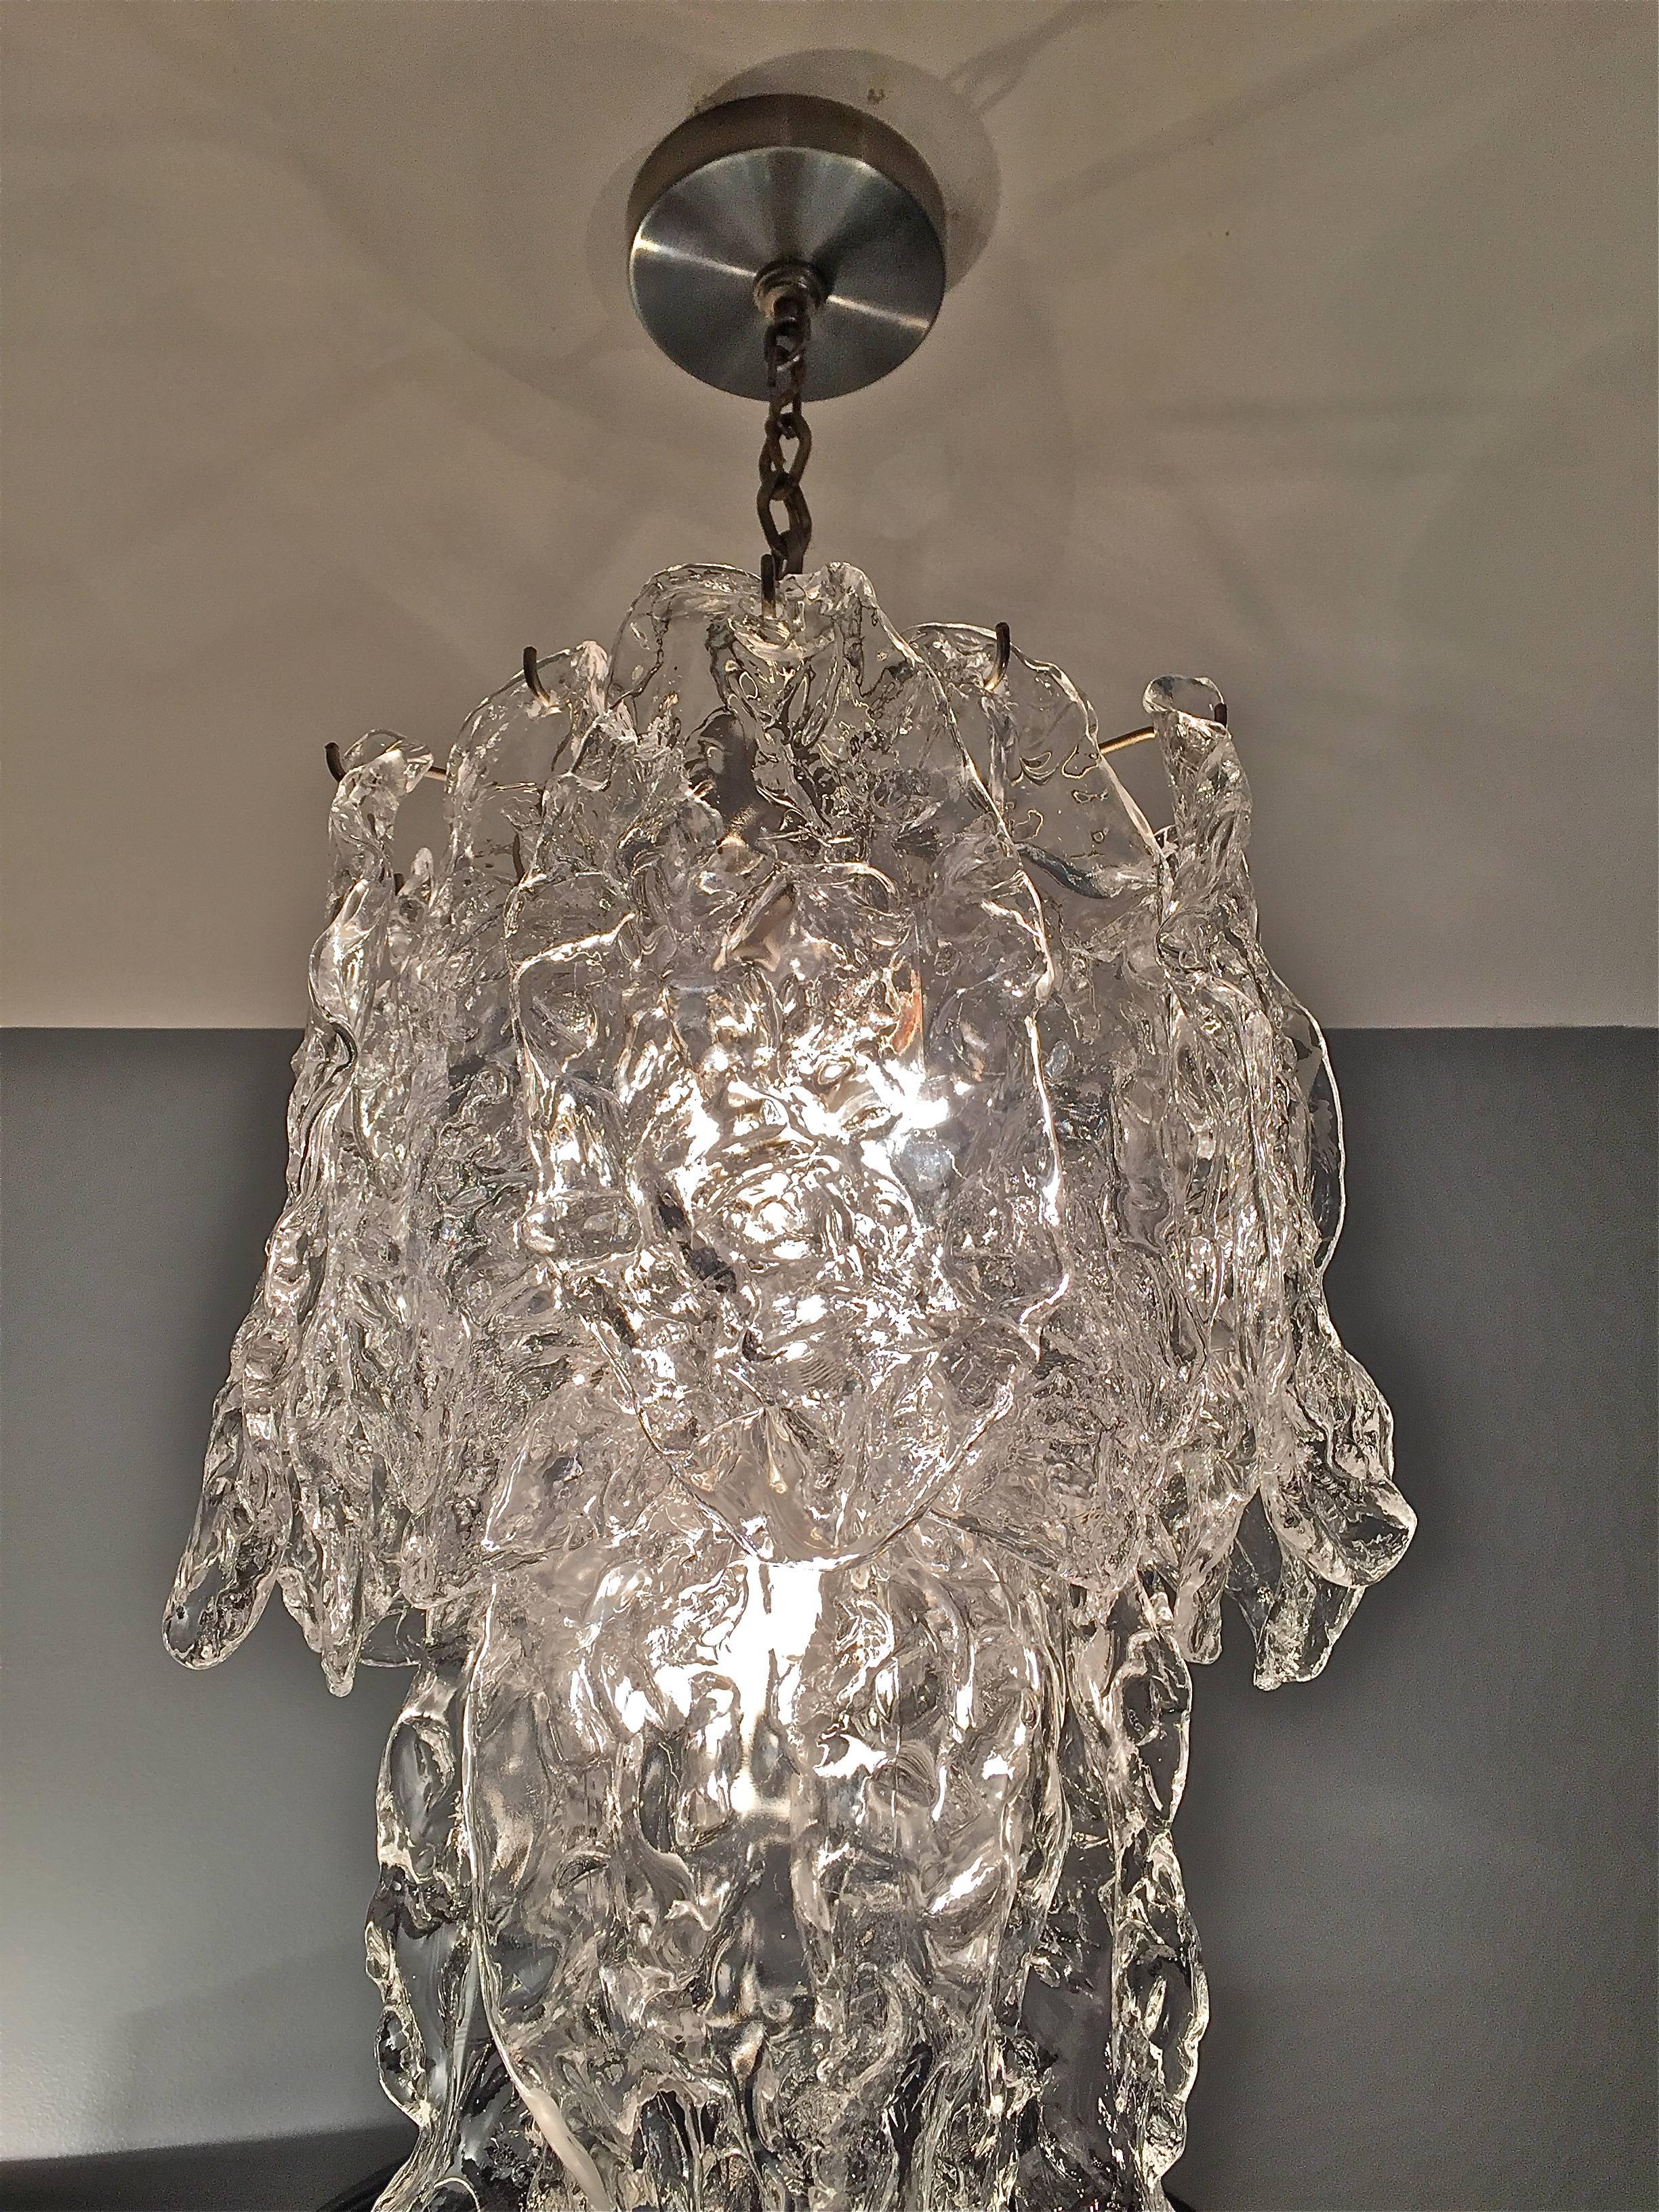 Stunning clear glass chandelier with a nickel plated armature by Mazzega, Italy, circa 1970s. Total length of the fixture including the ceiling cap is 29.5 inches.